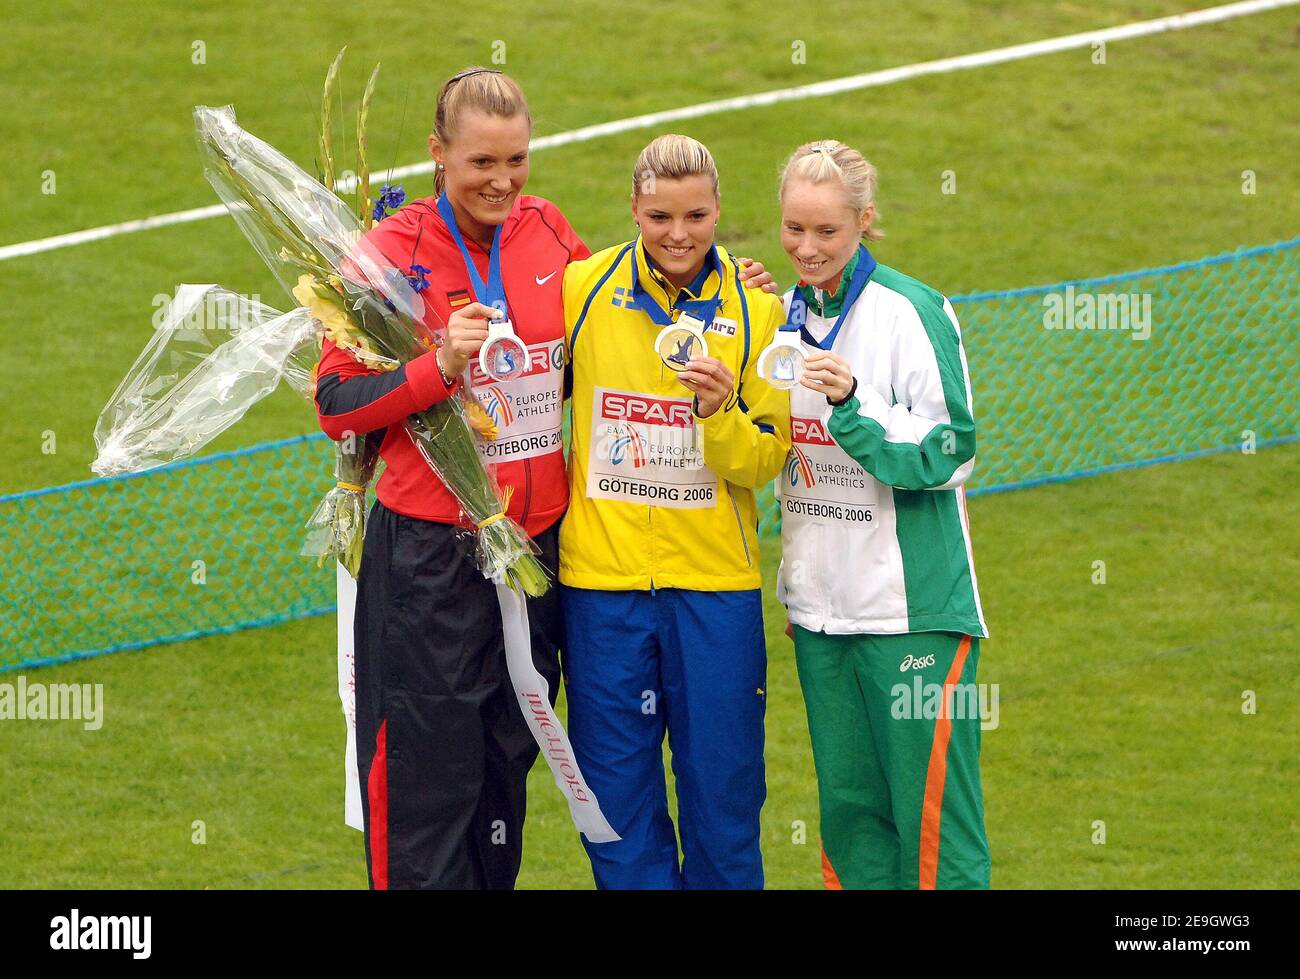 Sweden's Susanna Kallur (C) celebrates on the podium of the Women's 100m Hurdles next to Ireland's Derval O'Rourke (R) and Germany's Kirsten Bolm (R) during a ceremony at the European Track and Field Championships, in Goteborg, Sweden, on August 12, 2006. Photo by Guibbaud-Kempinaire/Cameleon/ABACAPRESS.COM Stock Photo